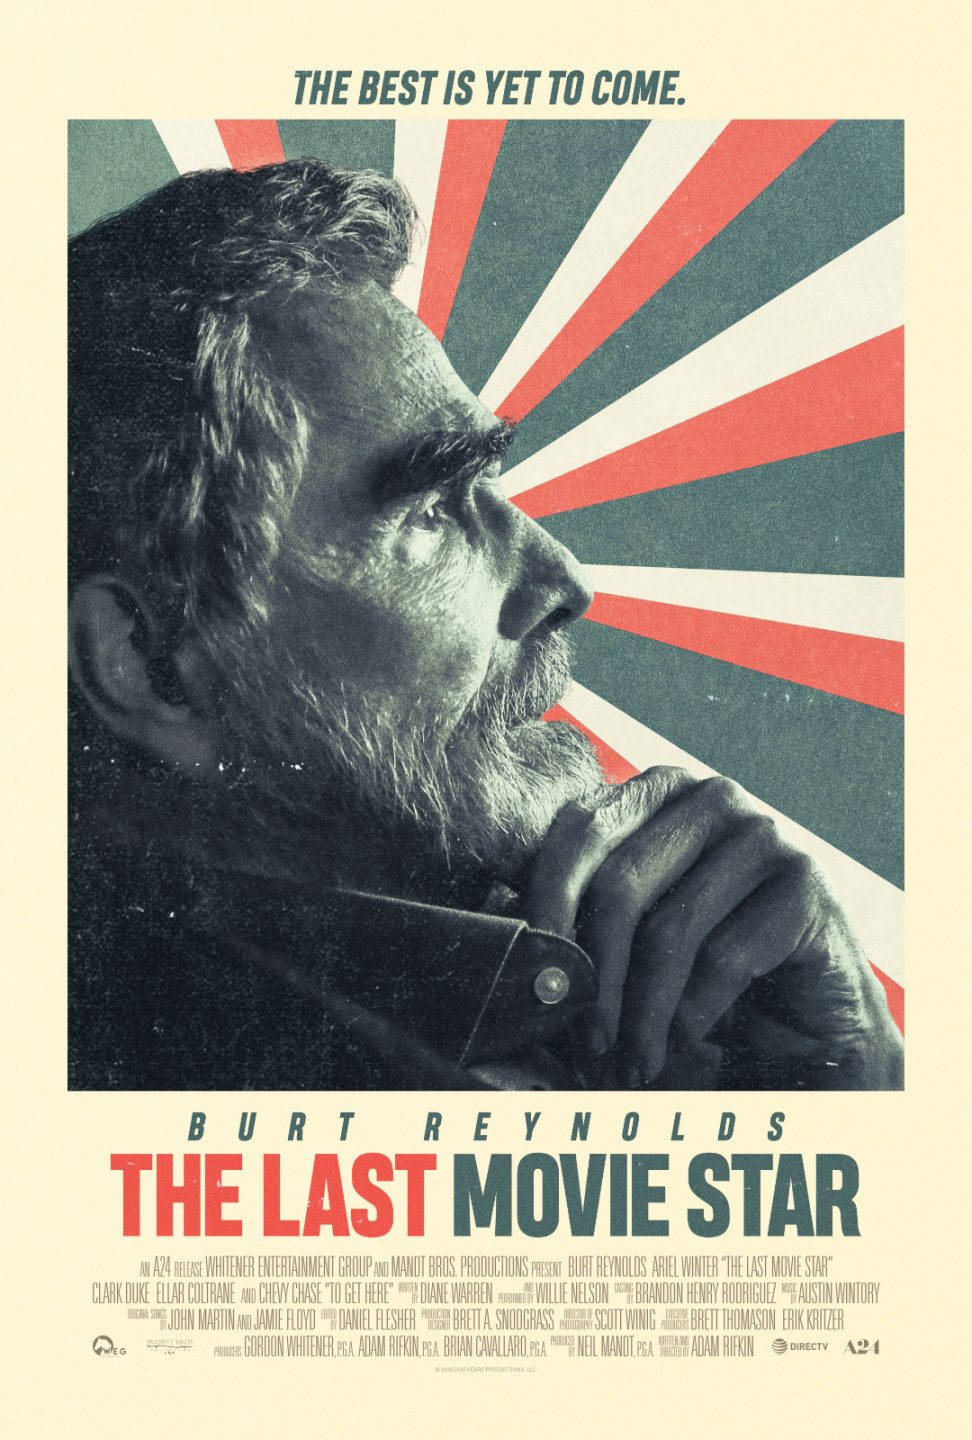 The Last Movie Star poster (A24 Films)